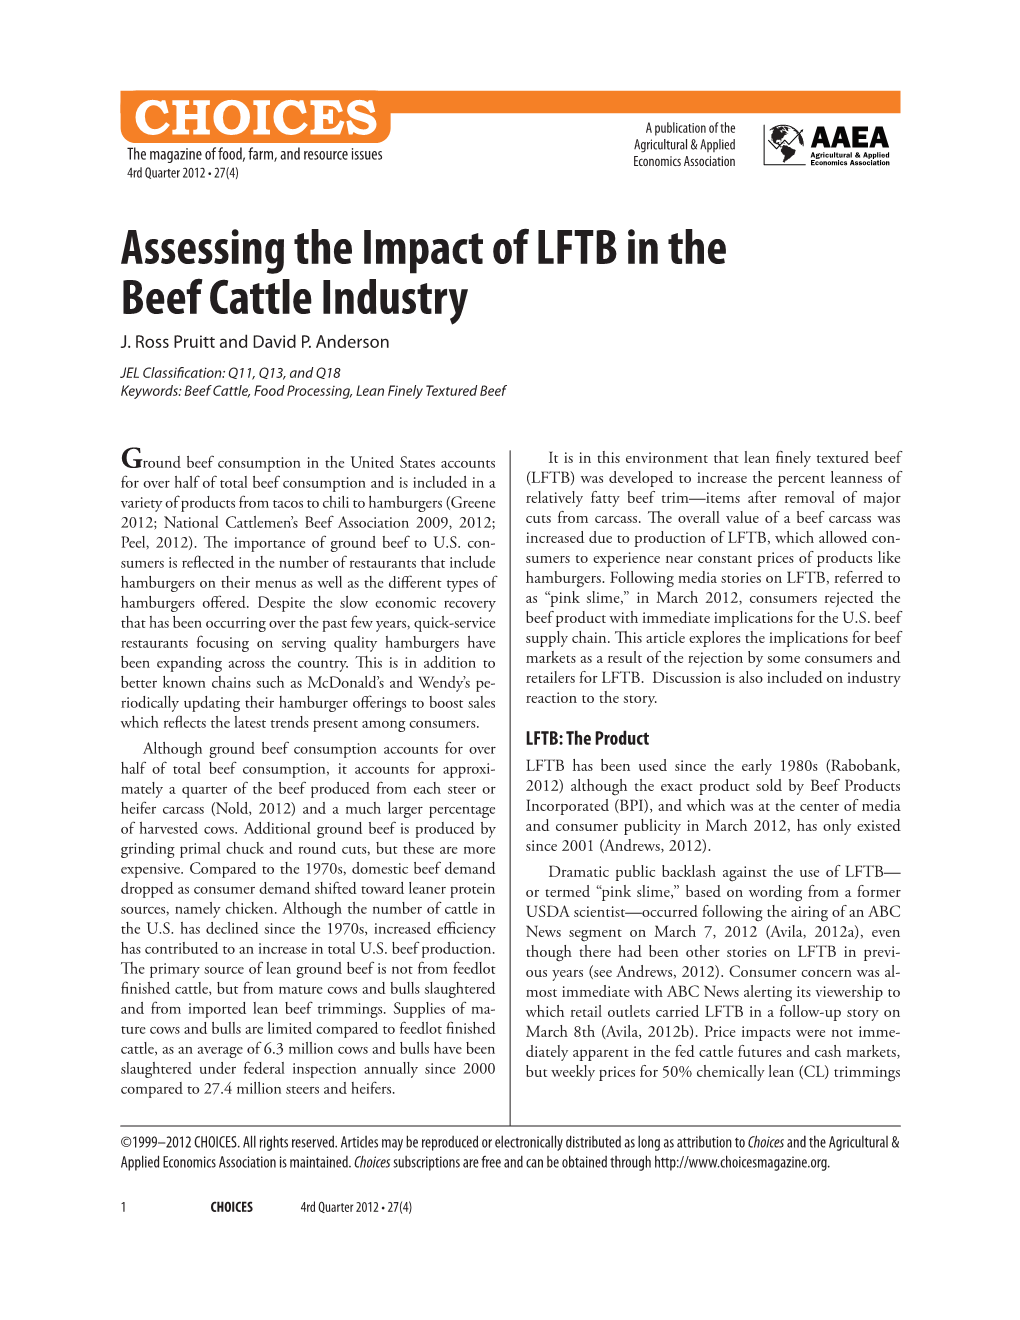 Assessing the Impact of LFTB in the Beef Cattle Industry J